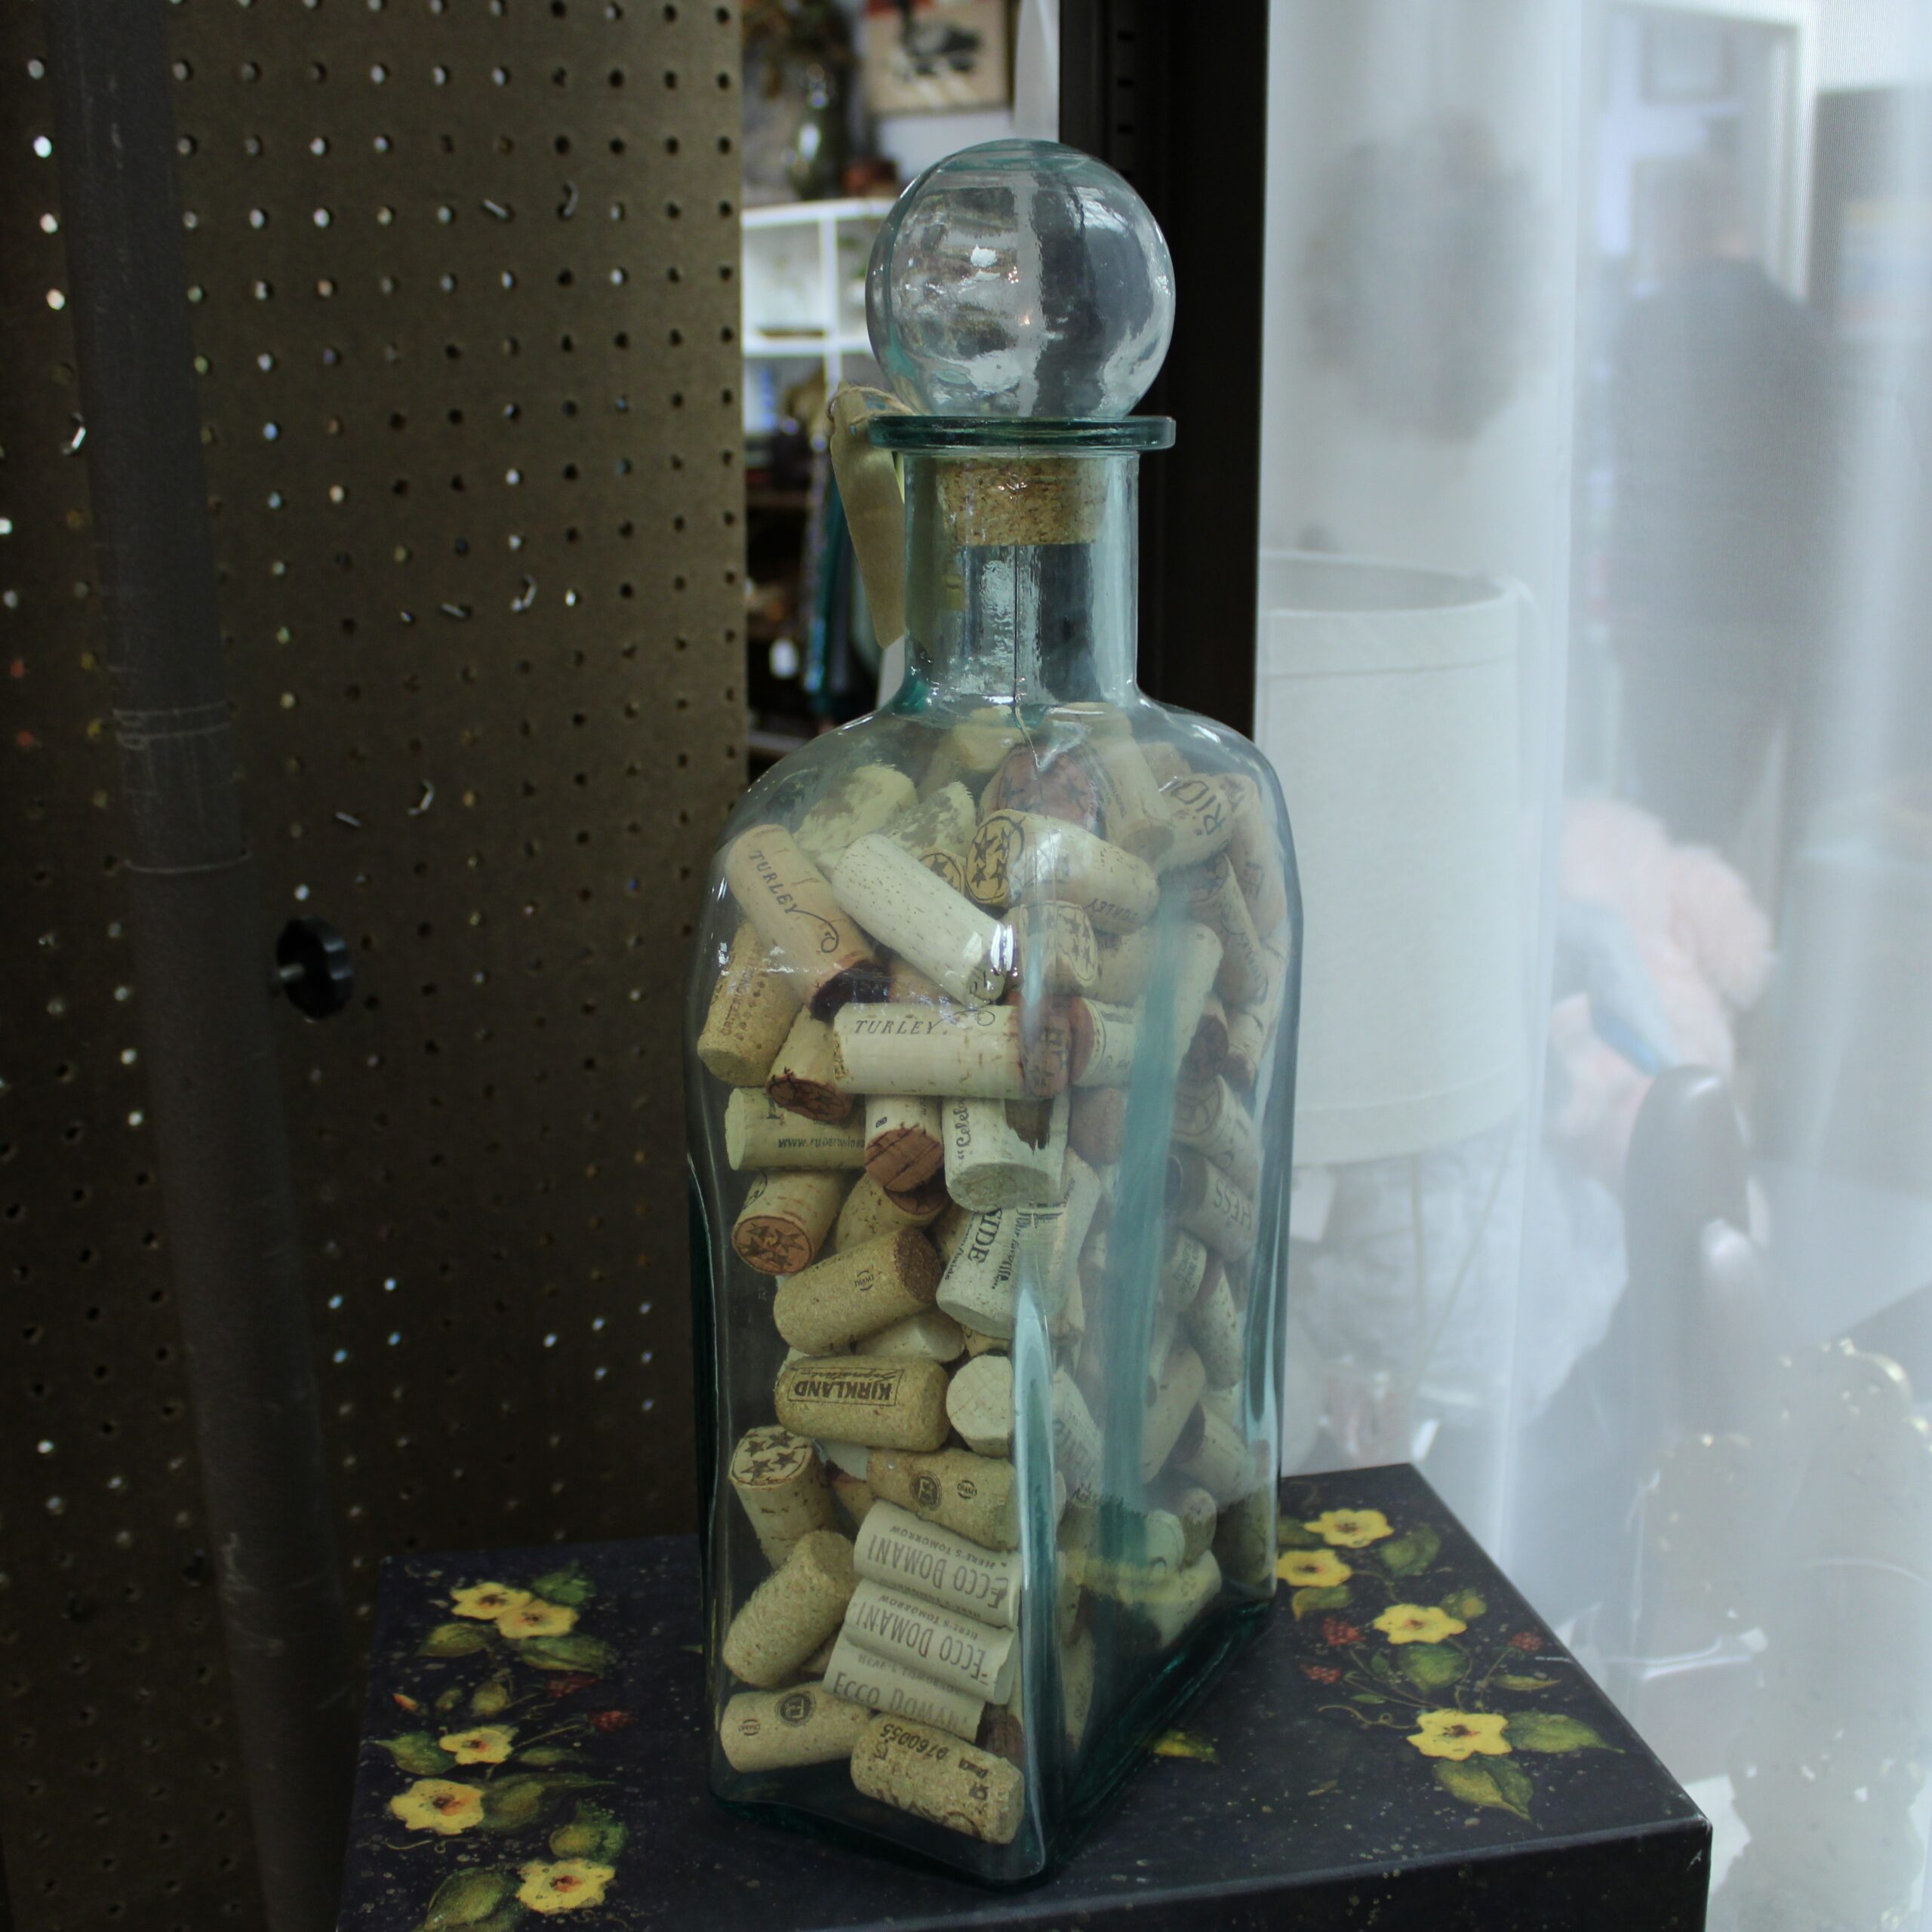 Large Decorative Glass Container with Glass & Cork Stopper – Filled with  Wine Corks – #736 – It's Bazaar on 21st Street